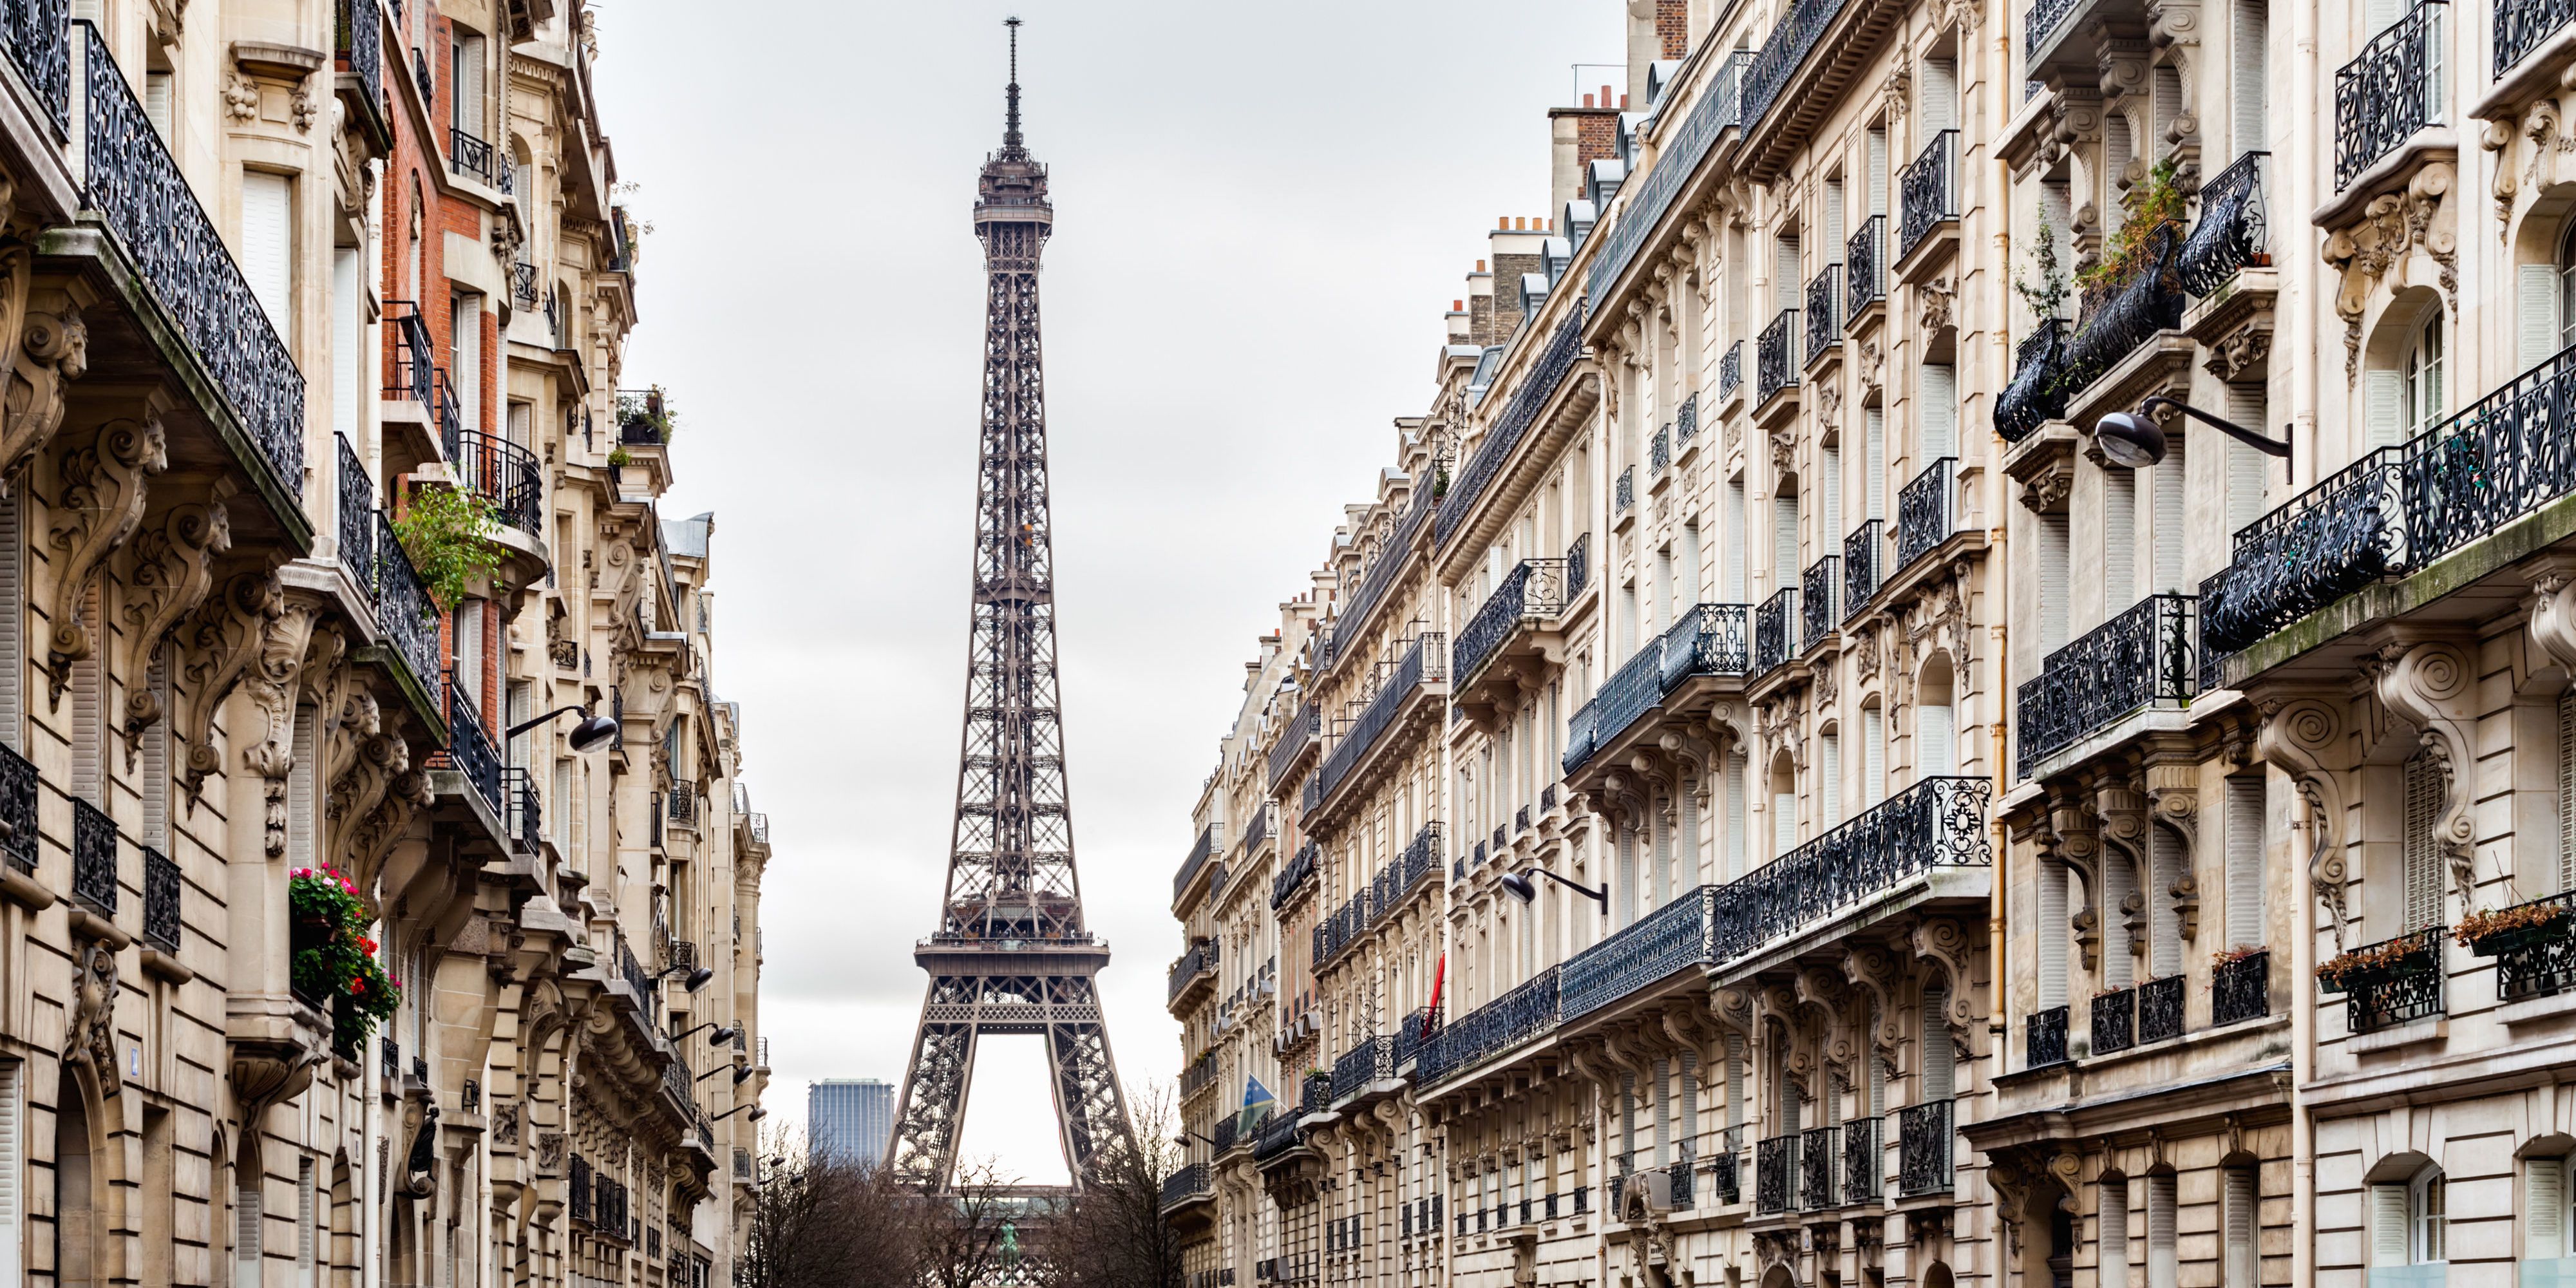 THINGS TO DO IN PARIS